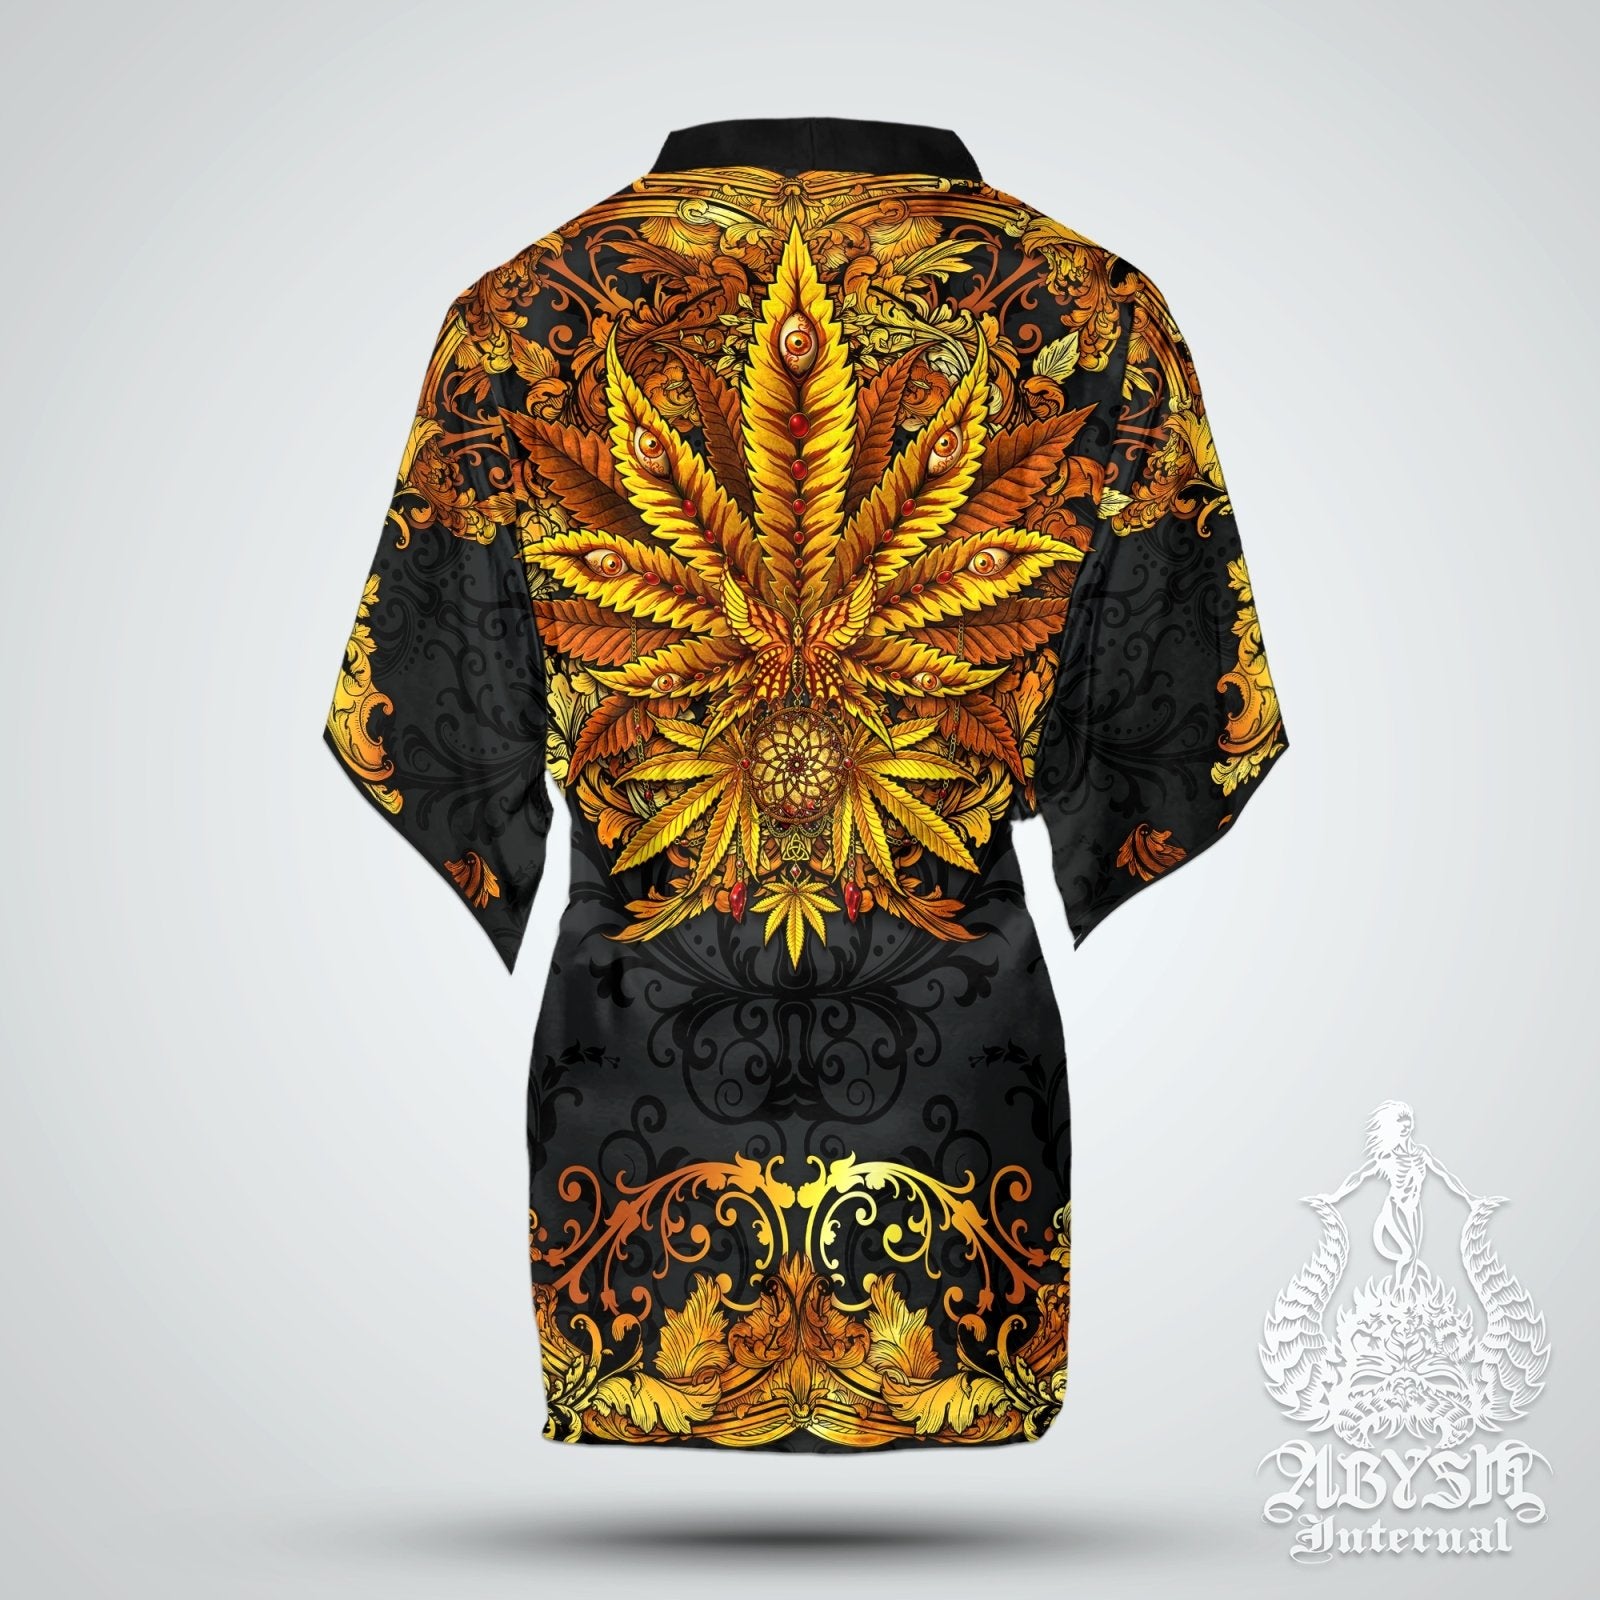 Cannabis Cover Up, Weed Outfit, Indie Party Kimono, Summer Festival Robe, 420 Gift, Alternative Clothing, Unisex - Marijuana, Gold - Abysm Internal